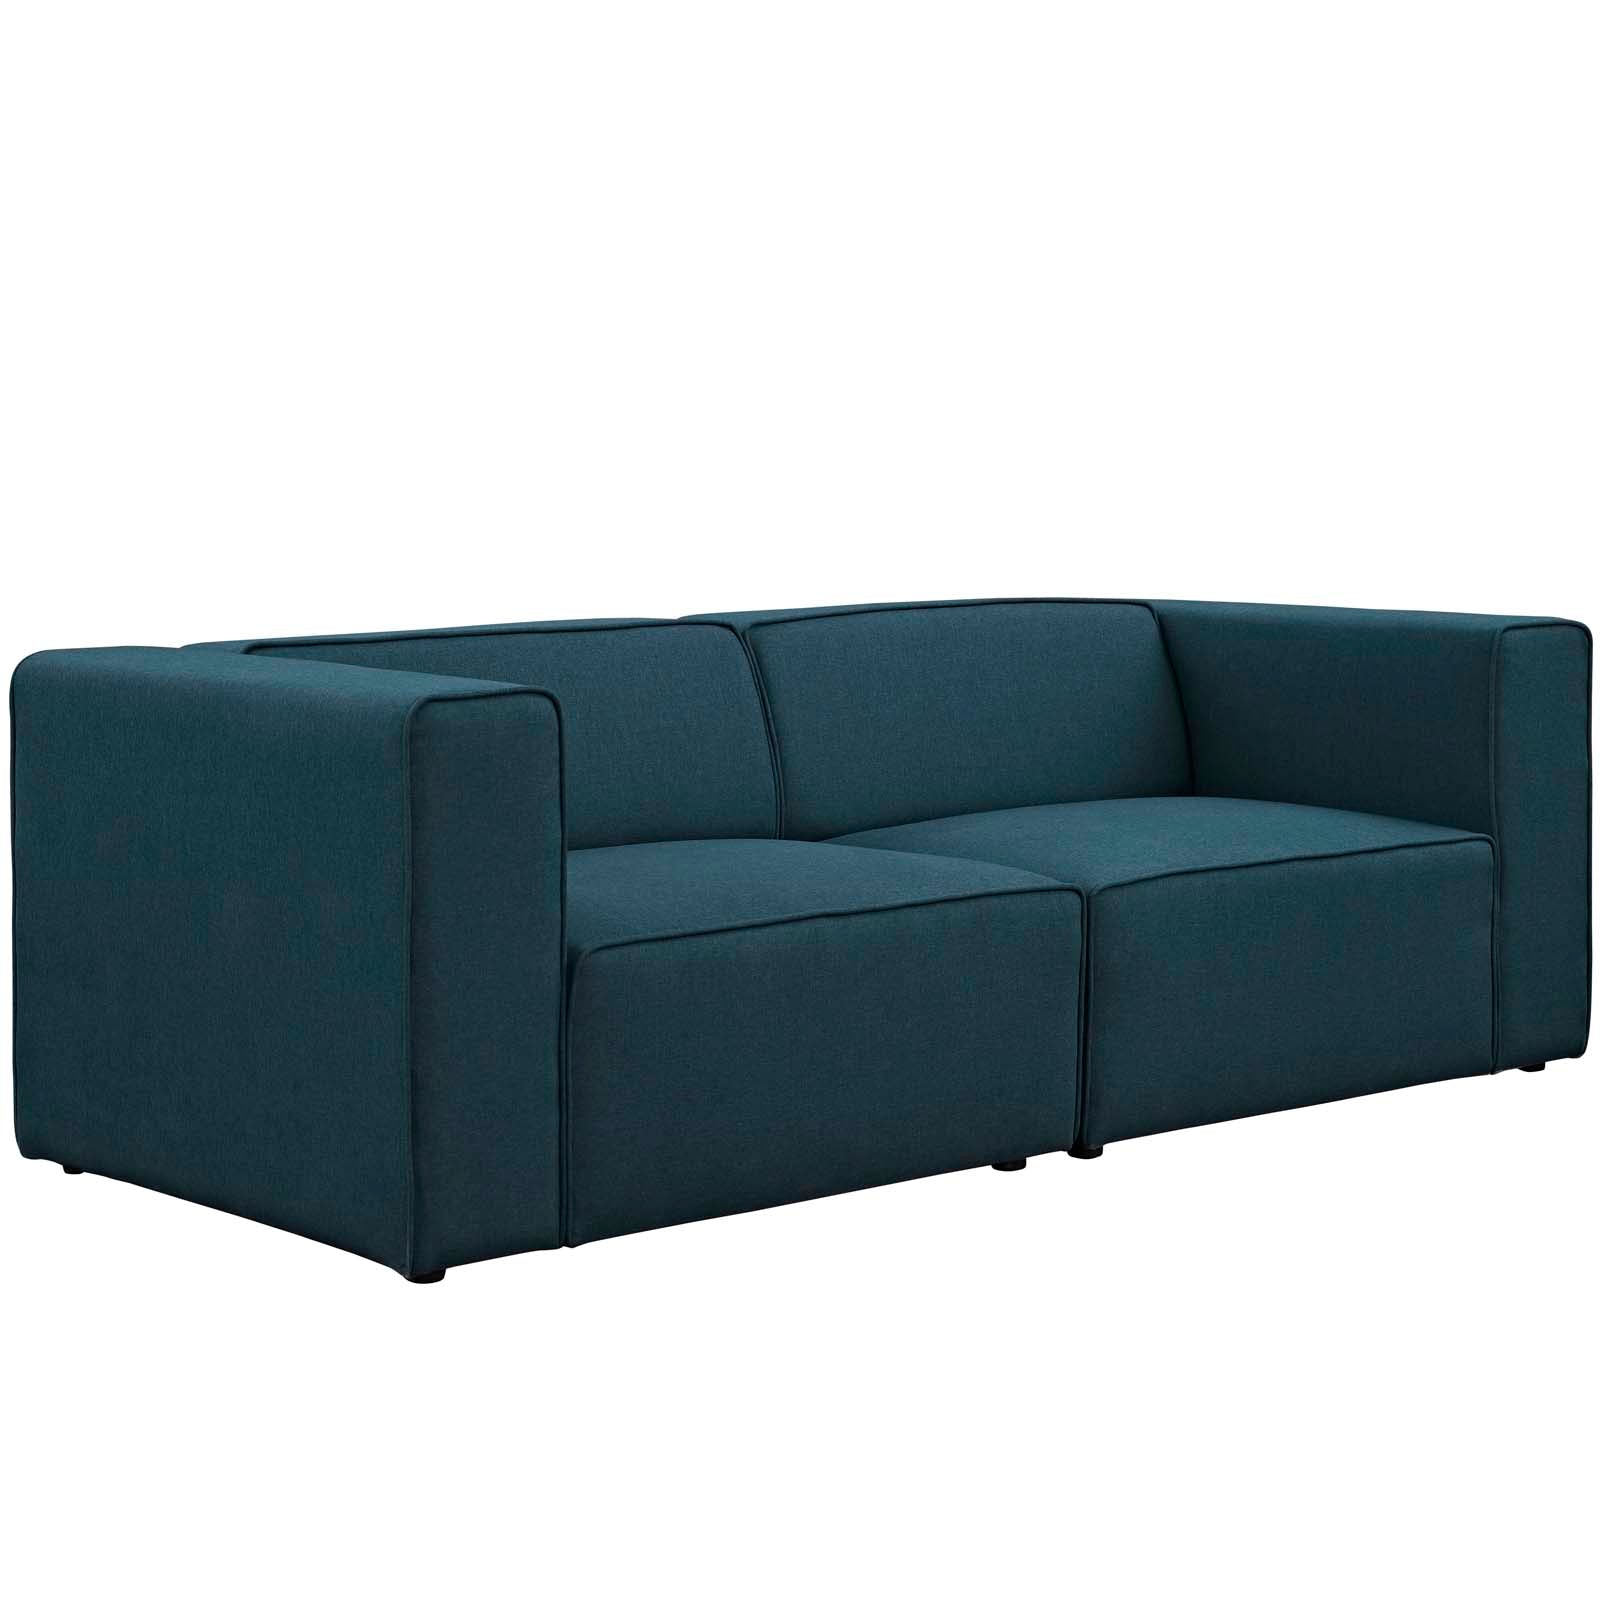 Upholstered Fabric Mingle 7 Generously Padded Armless Chair - Living Room Accent Sofa